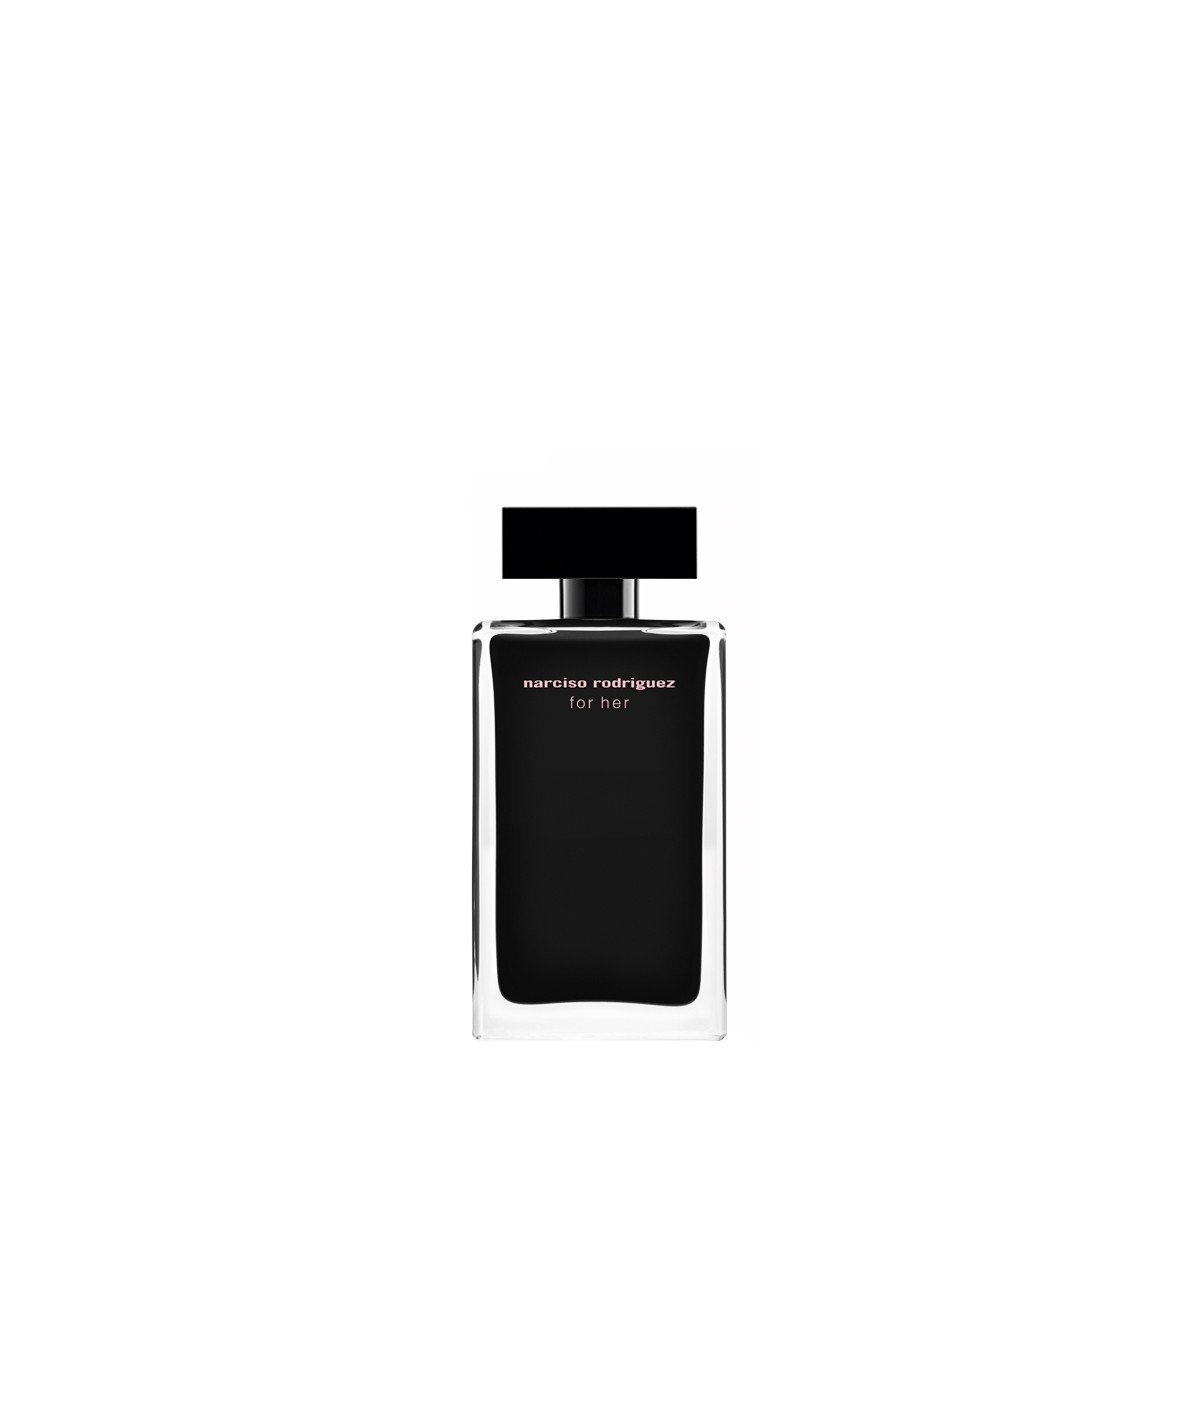 NARCISO RODRIGUEZ - "FOR HER"  EDT